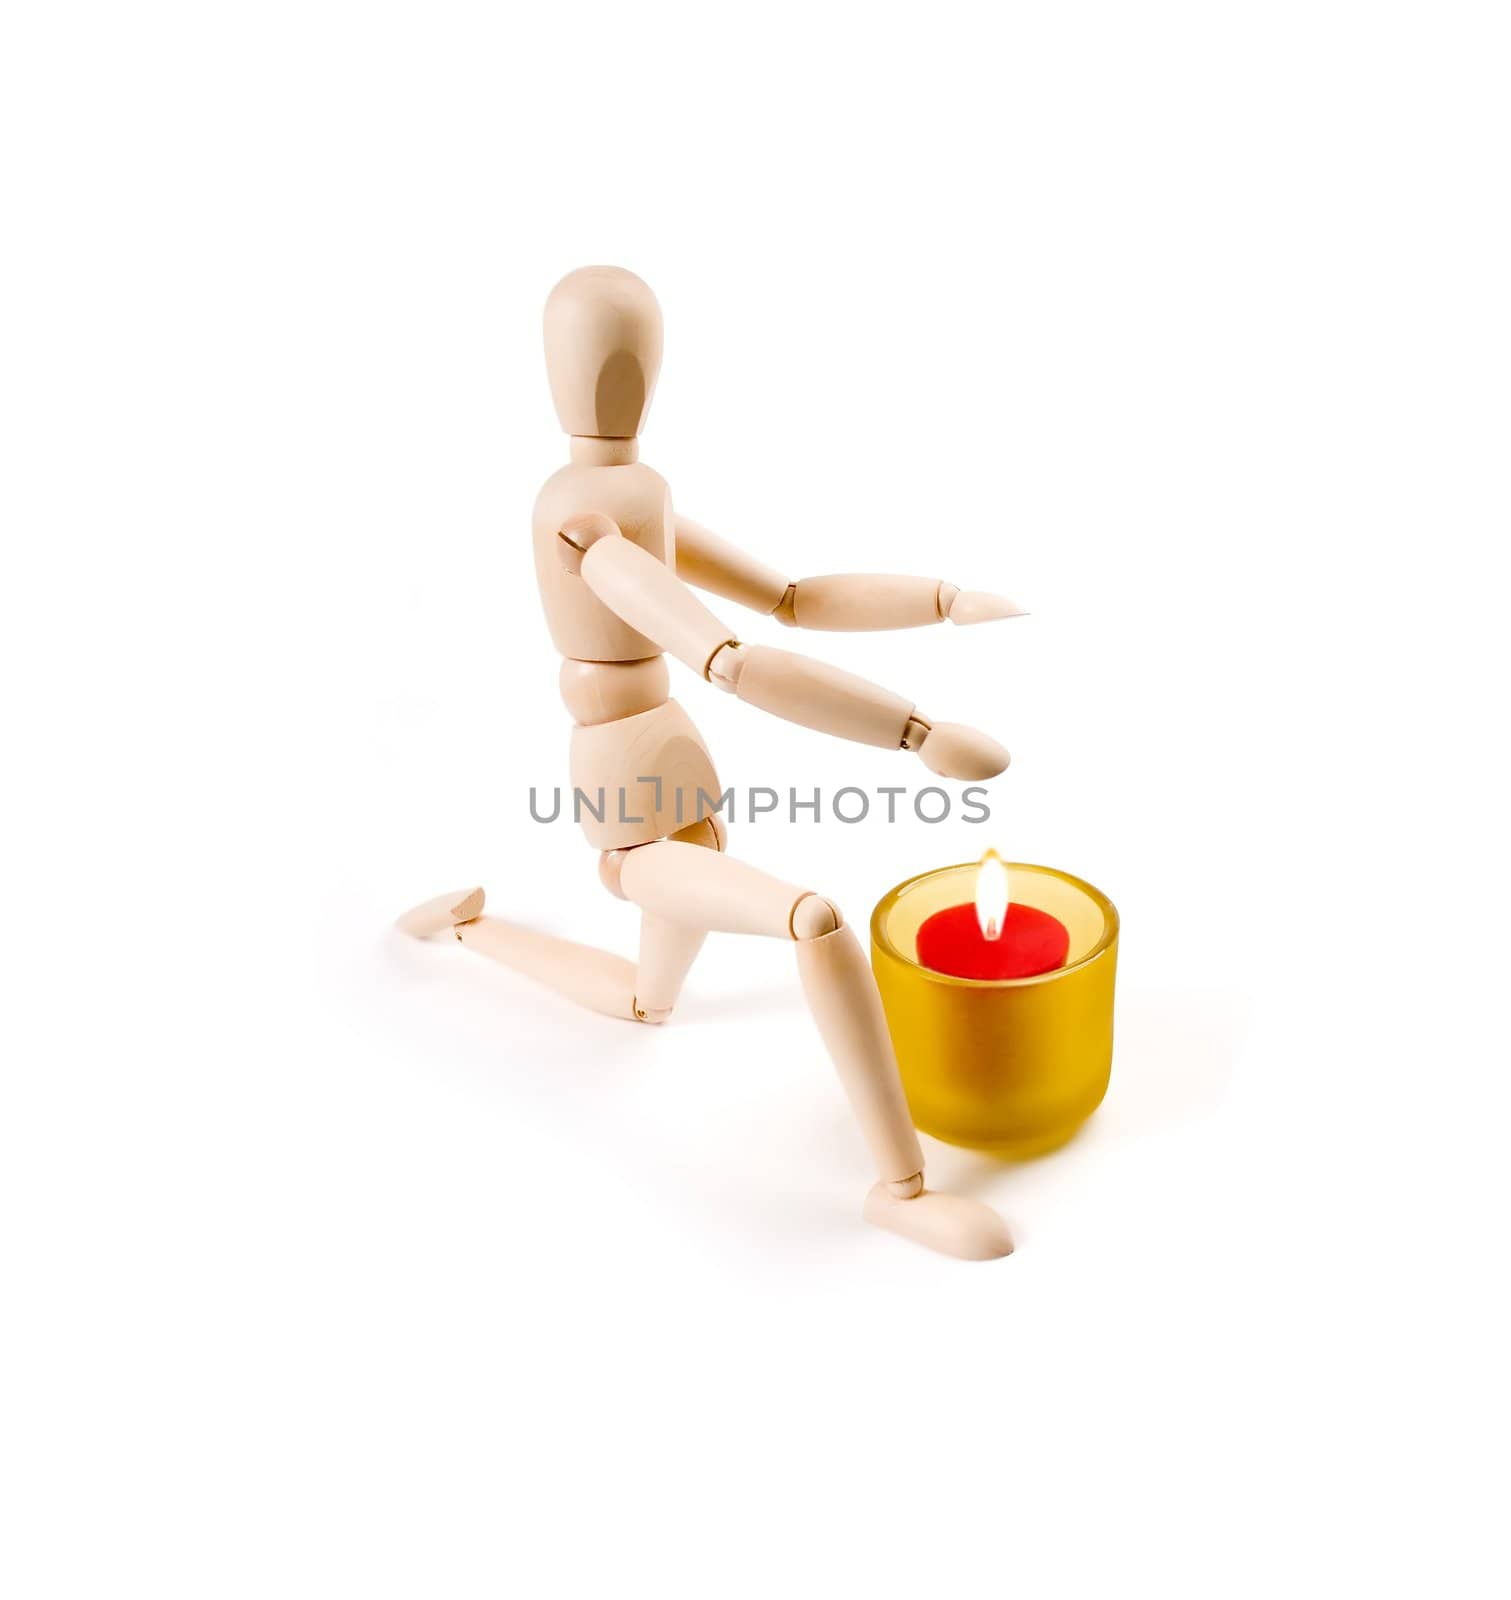 wood mannequin near a candle on white background